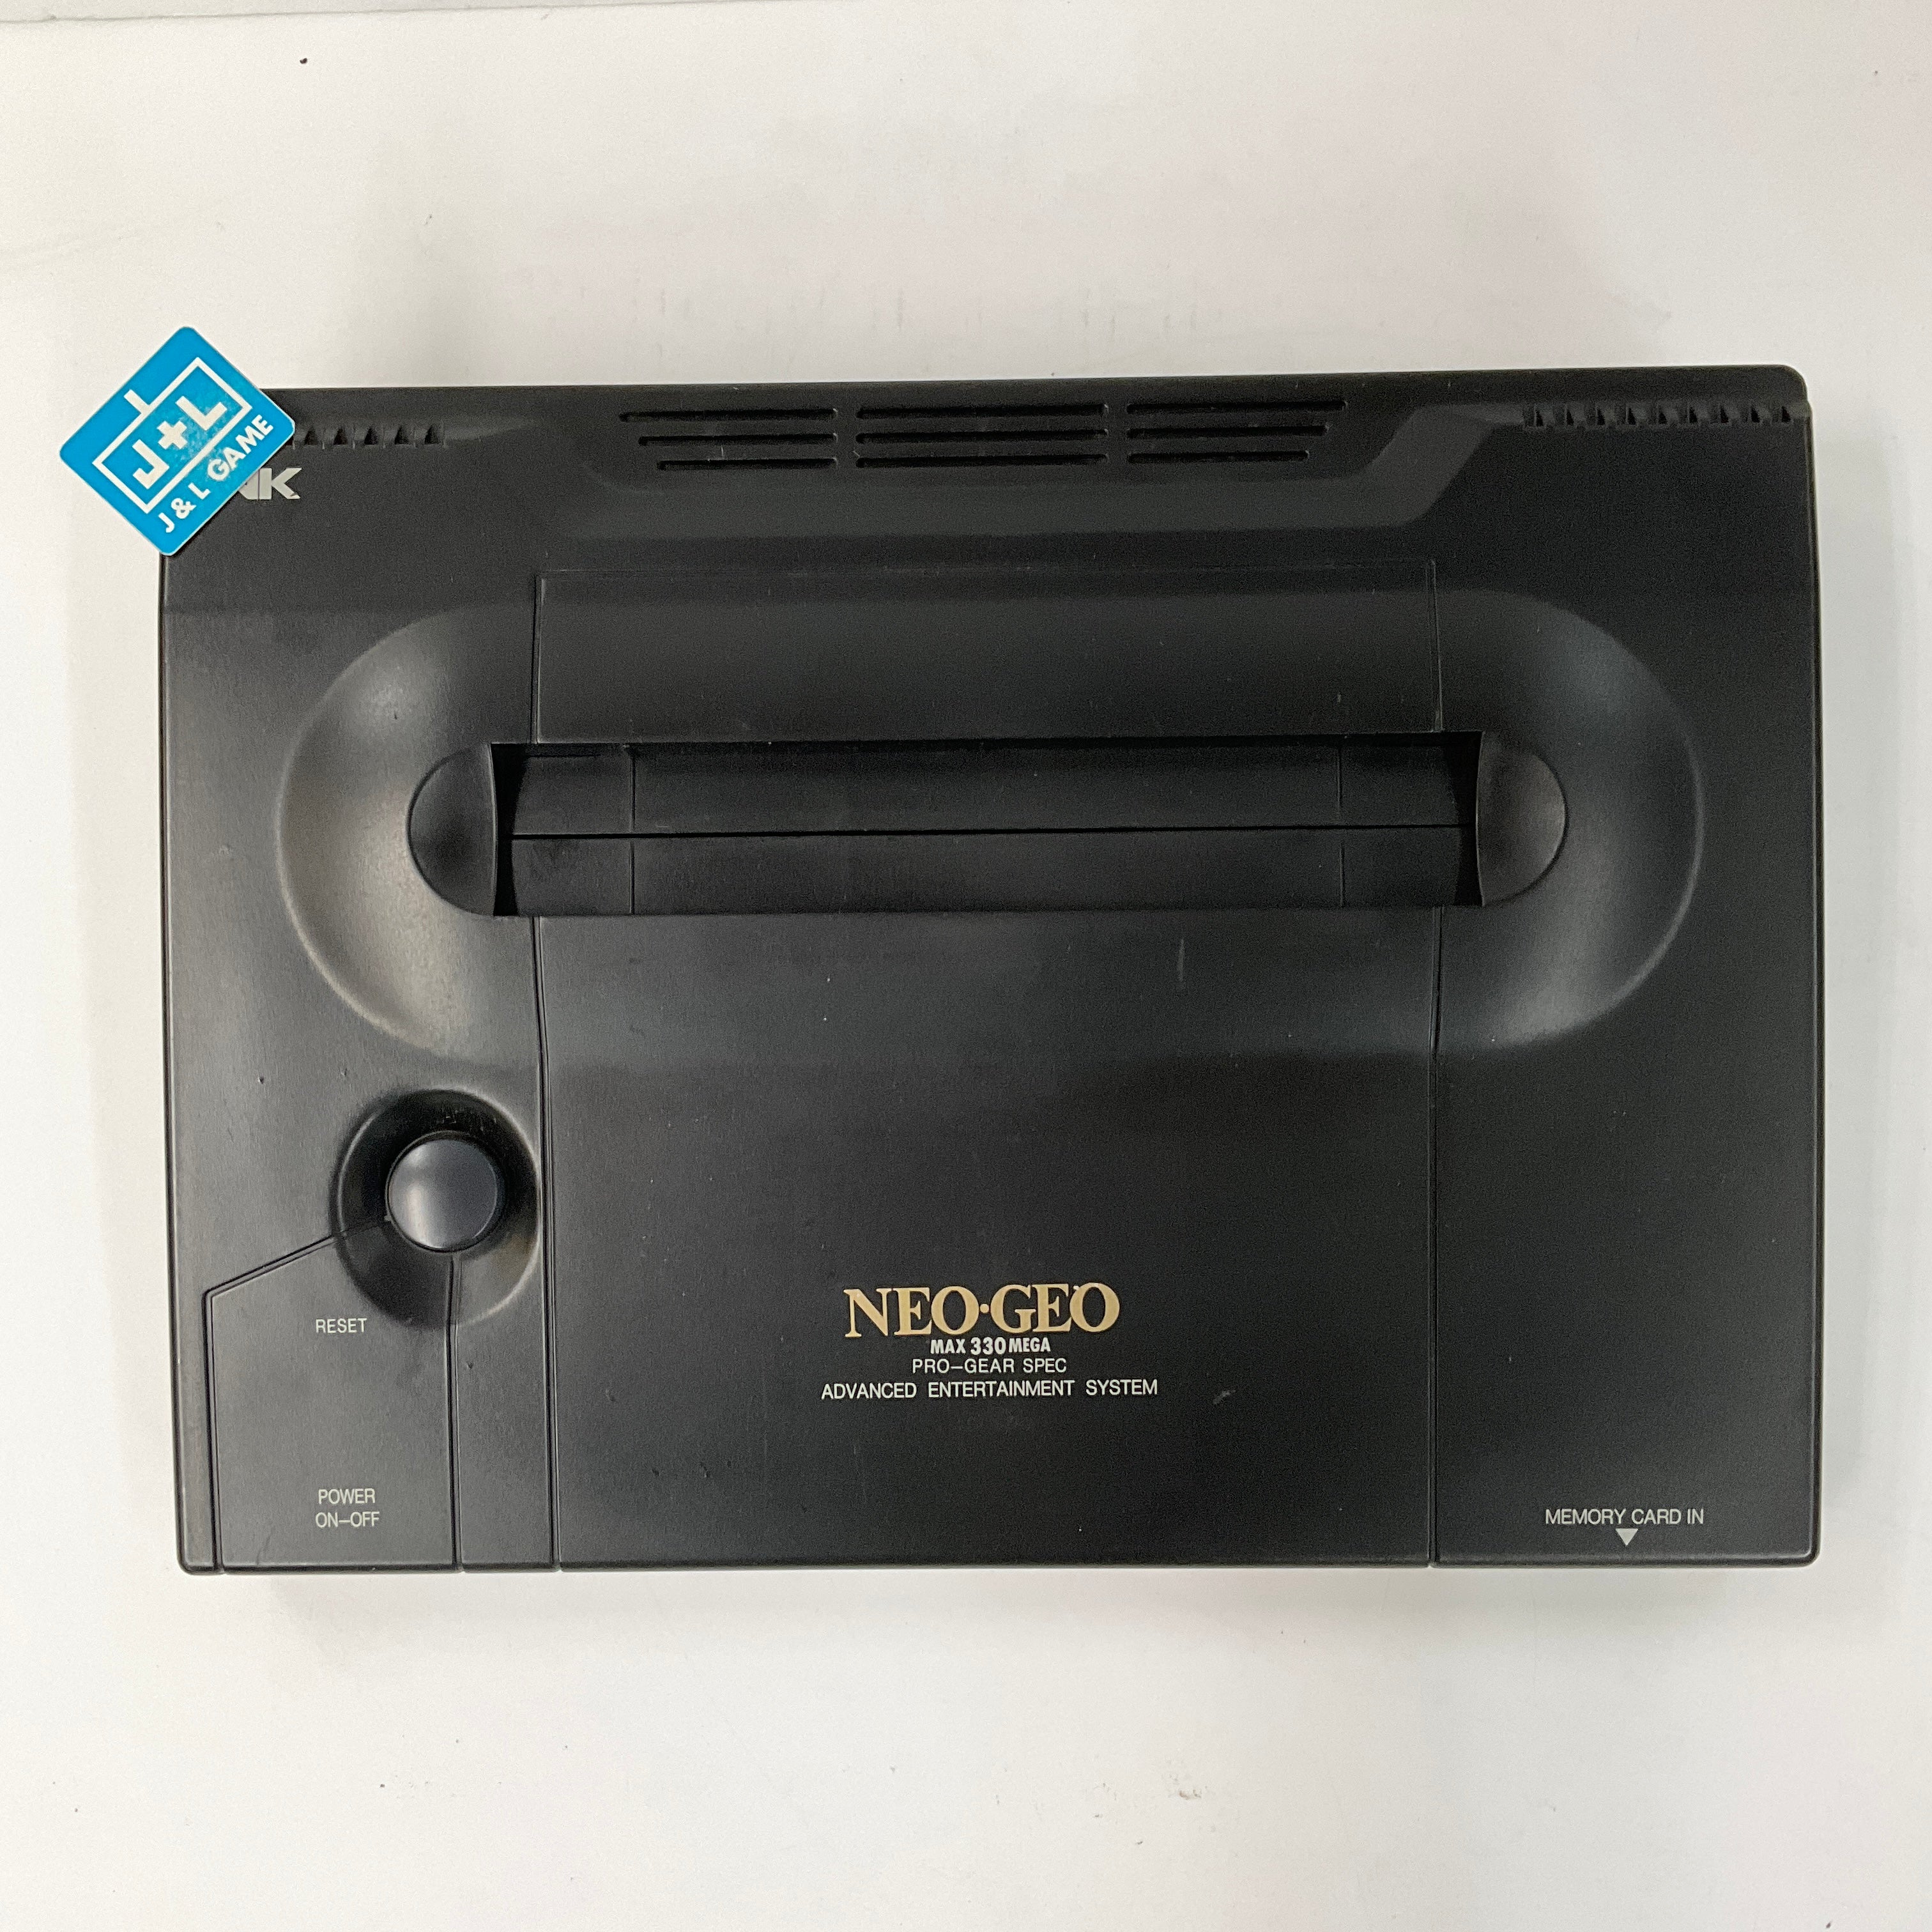 SNK Neo-Geo Advanced Entertainment System (AES) - SNK NeoGeo [Pre-Owned] (Japanese Import) CONSOLE SNK   